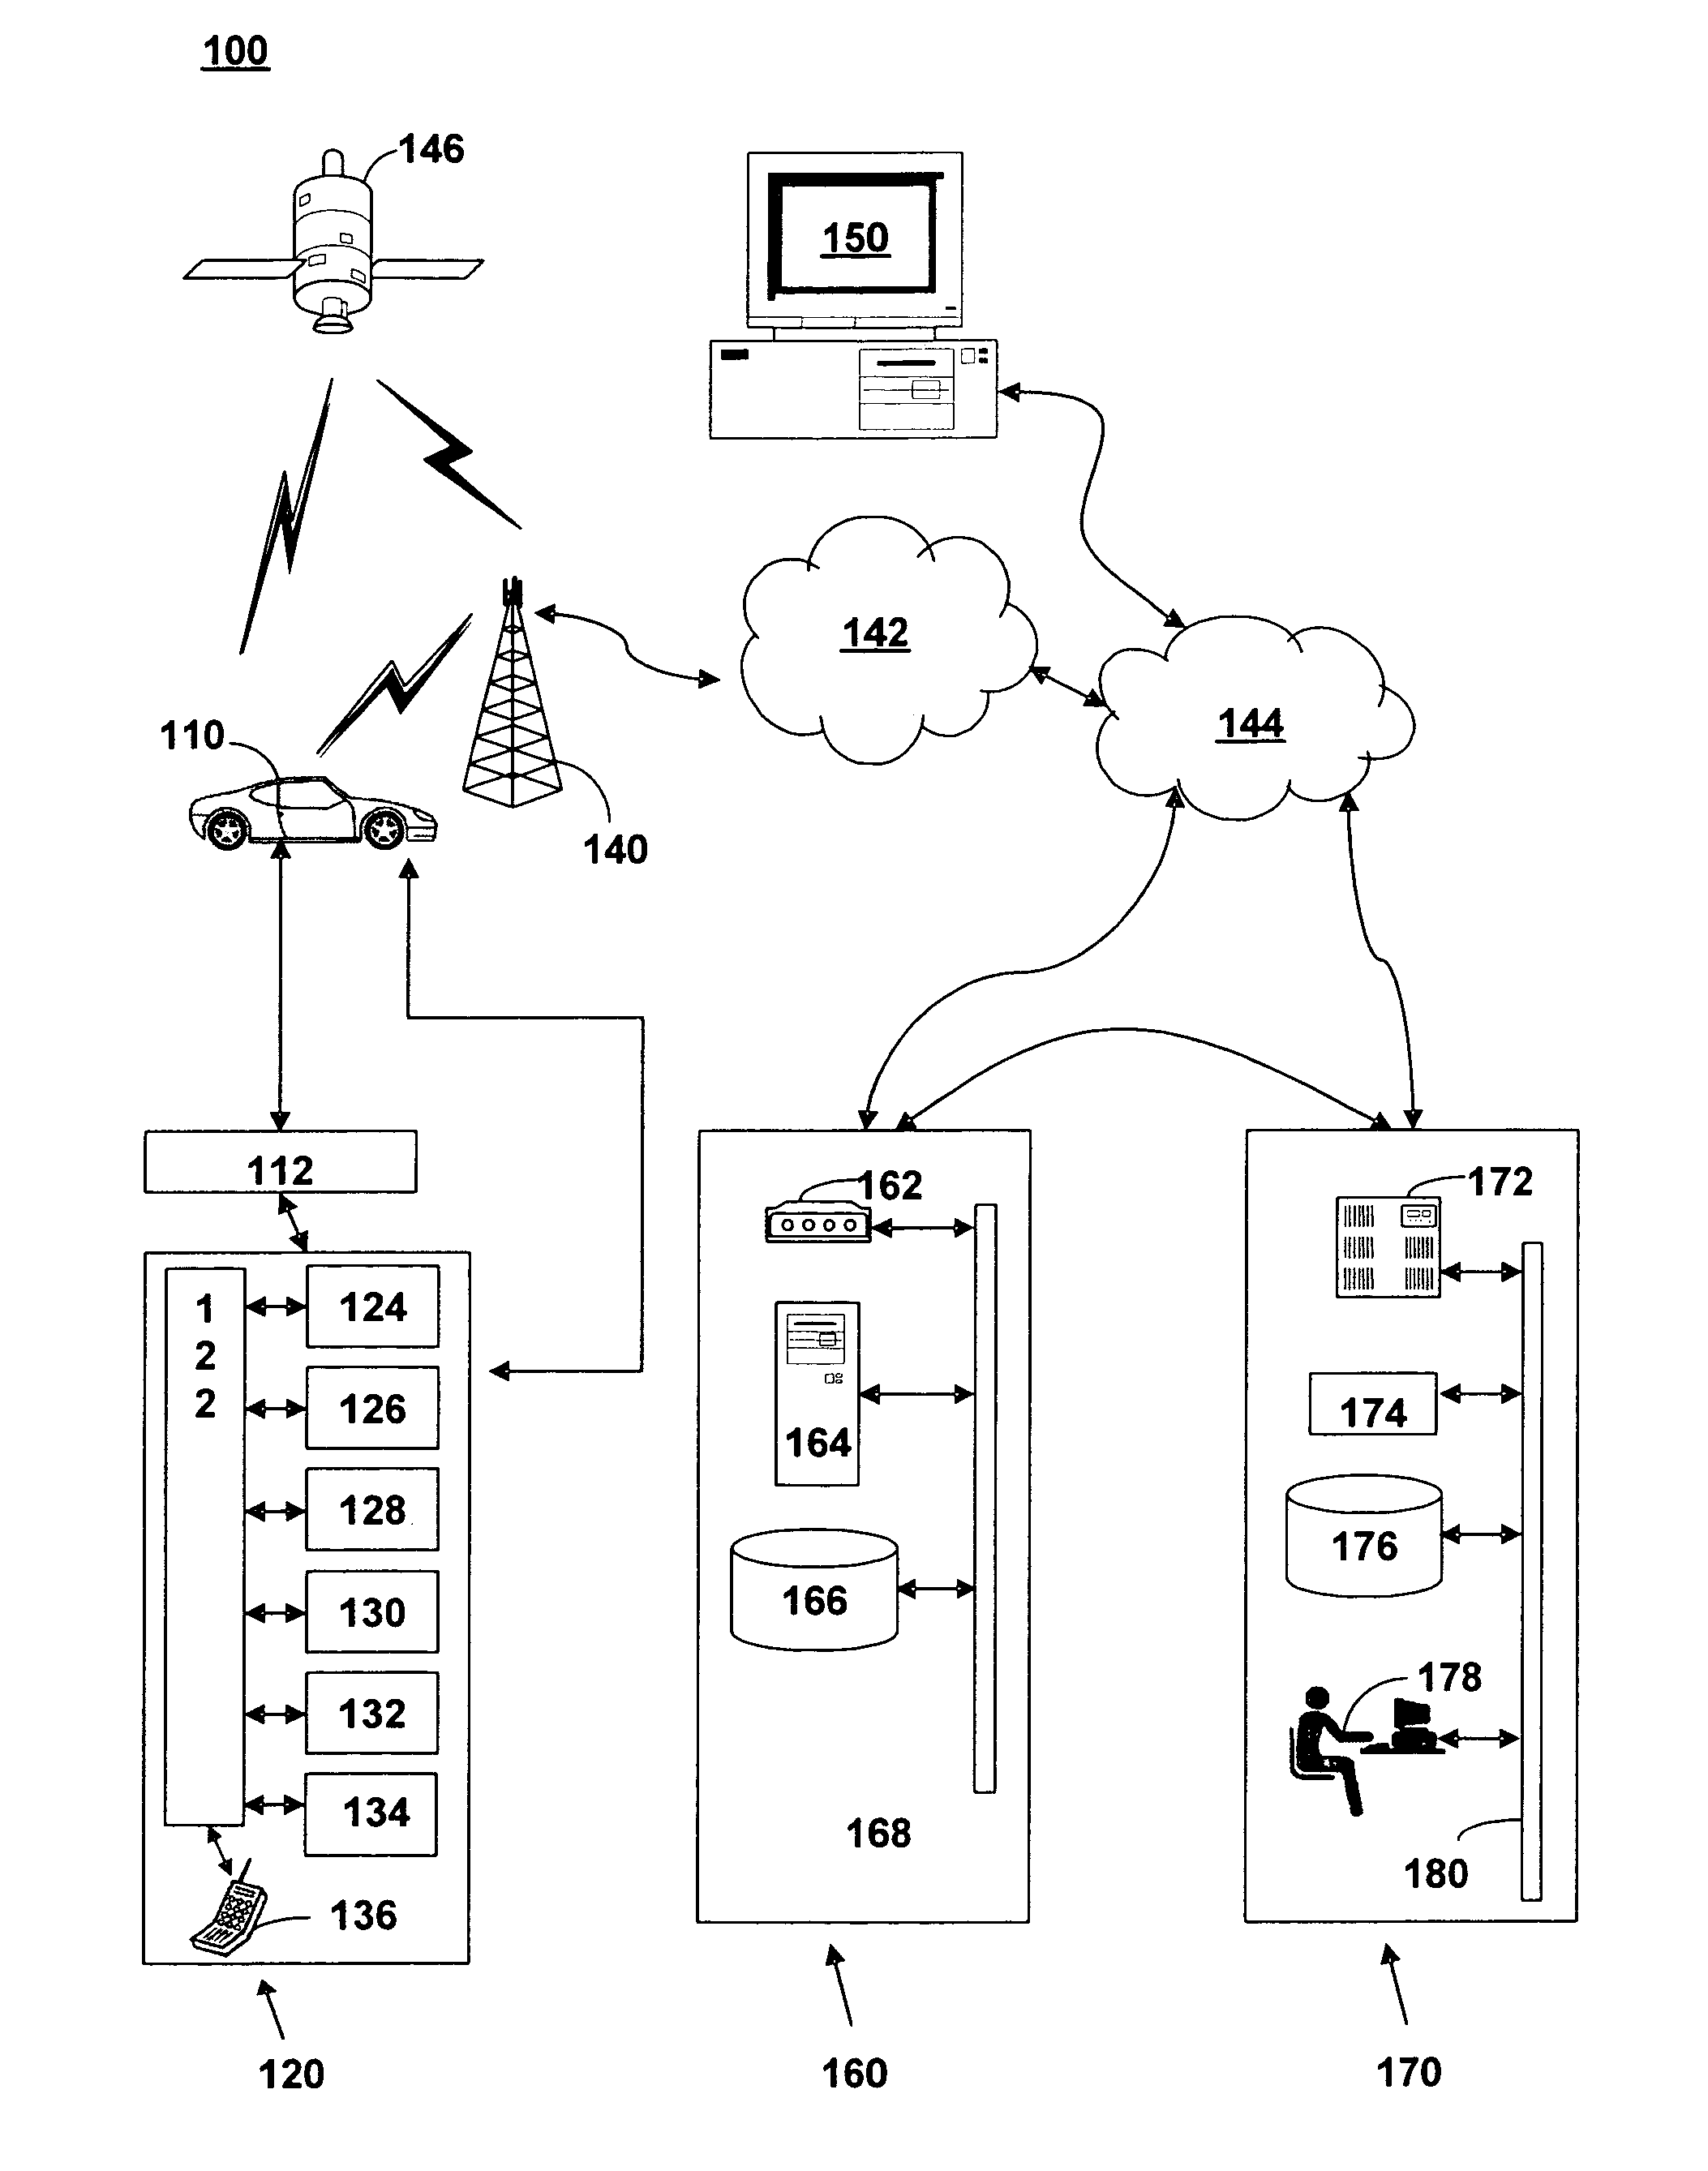 Method and system for provisioning turn-by-turn navigation demonstrations